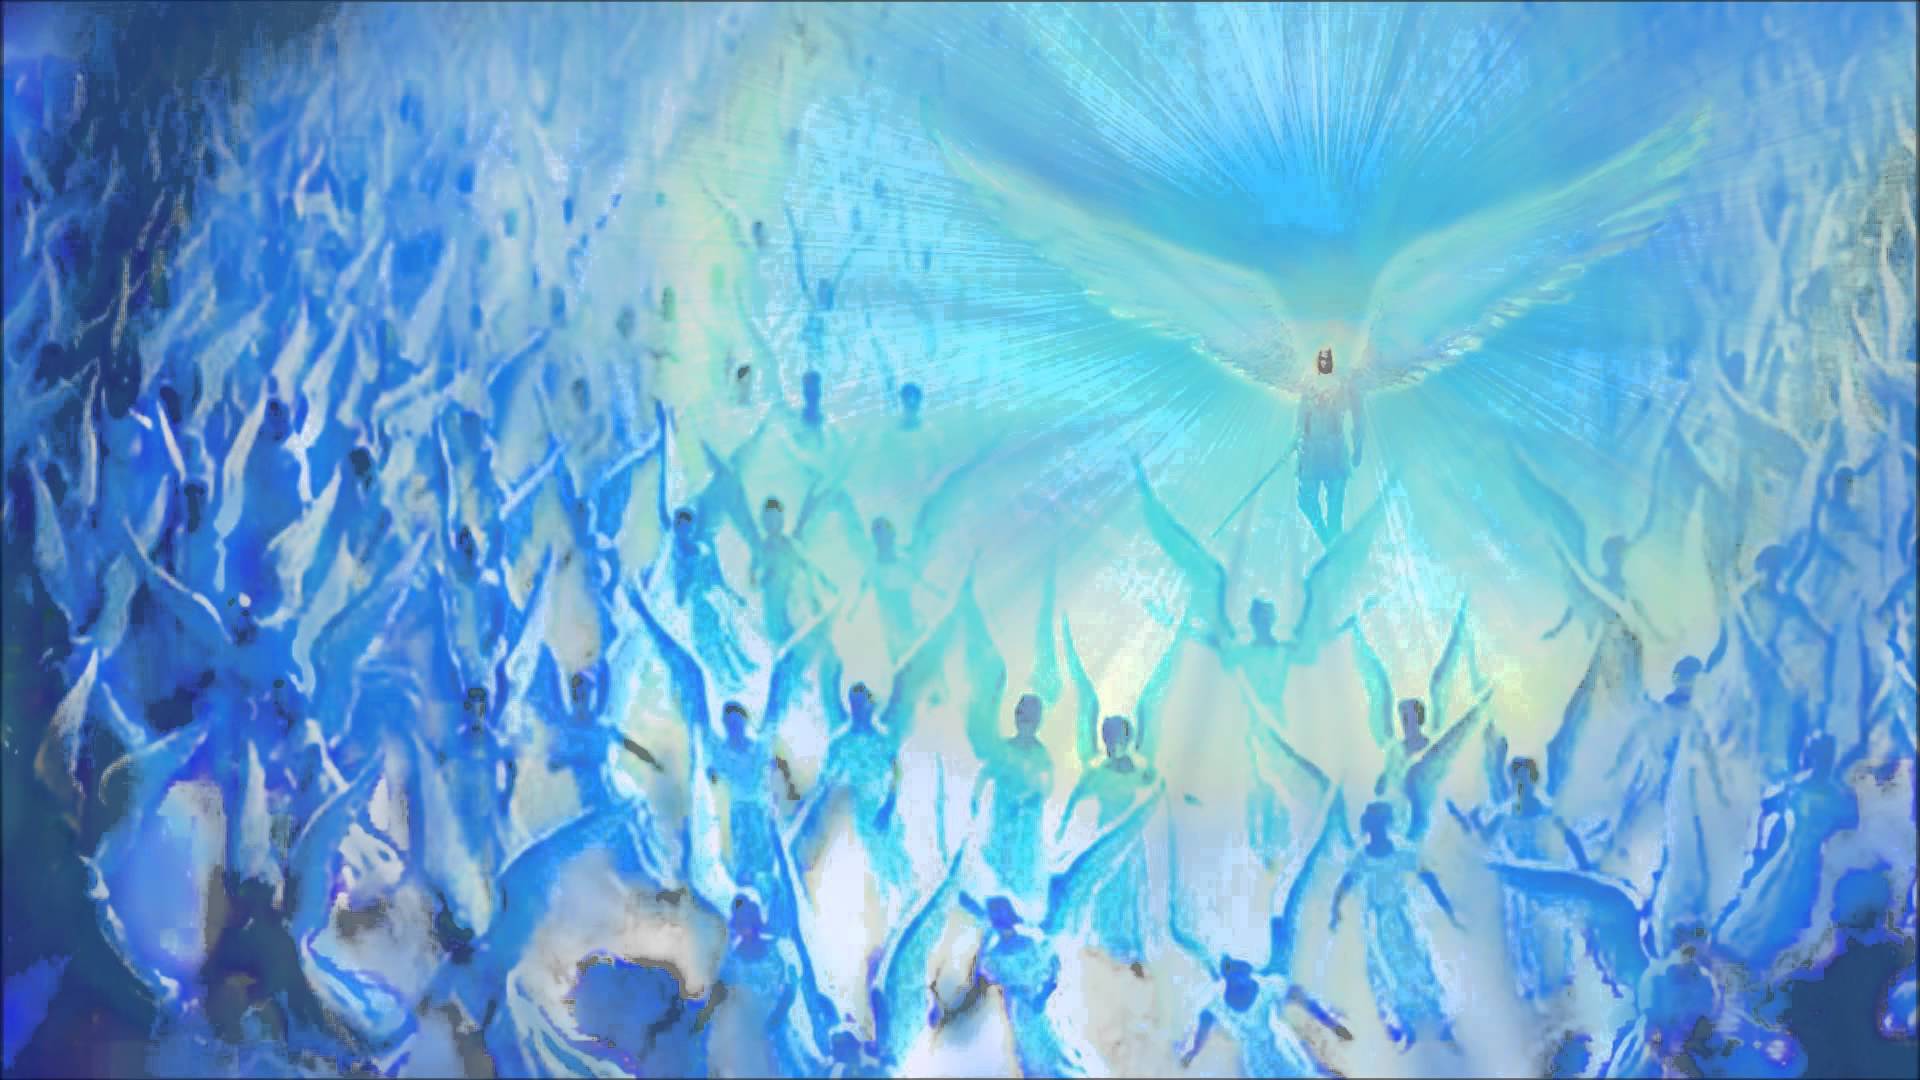 Archangel Michael and His Legions of Blue Flame Angels